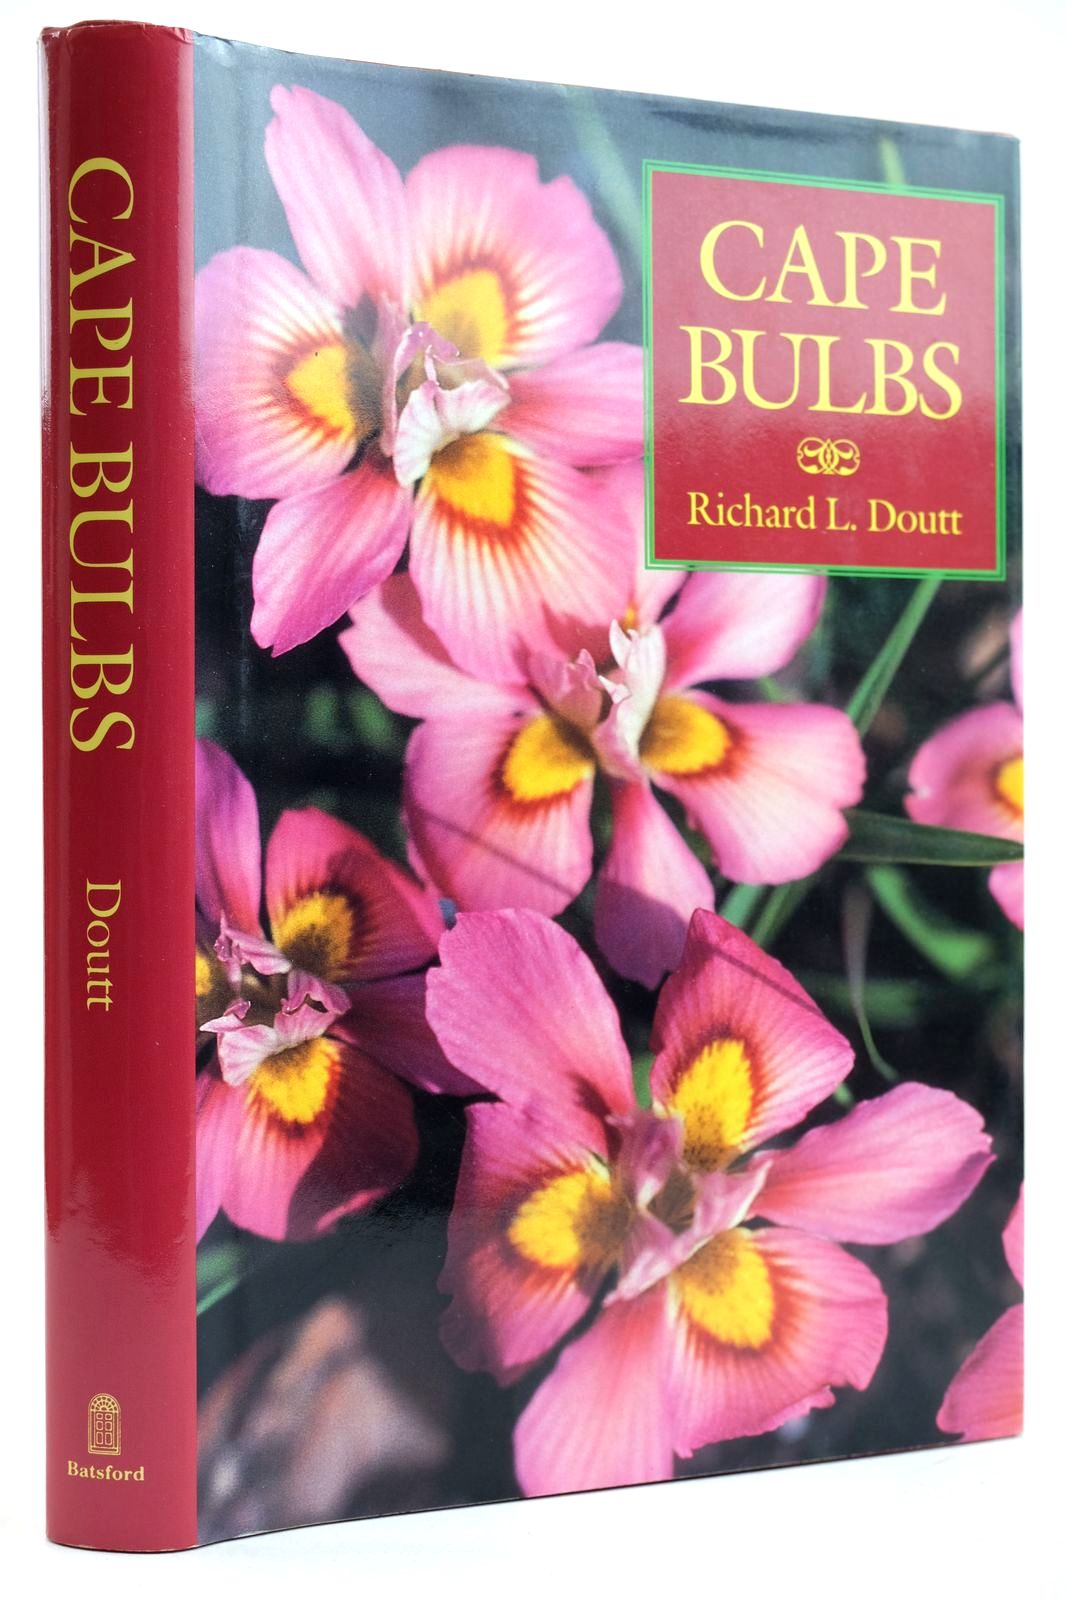 Photo of CAPE BULBS written by Doutt, Richard L. published by B.T. Batsford Ltd. (STOCK CODE: 2132682)  for sale by Stella & Rose's Books